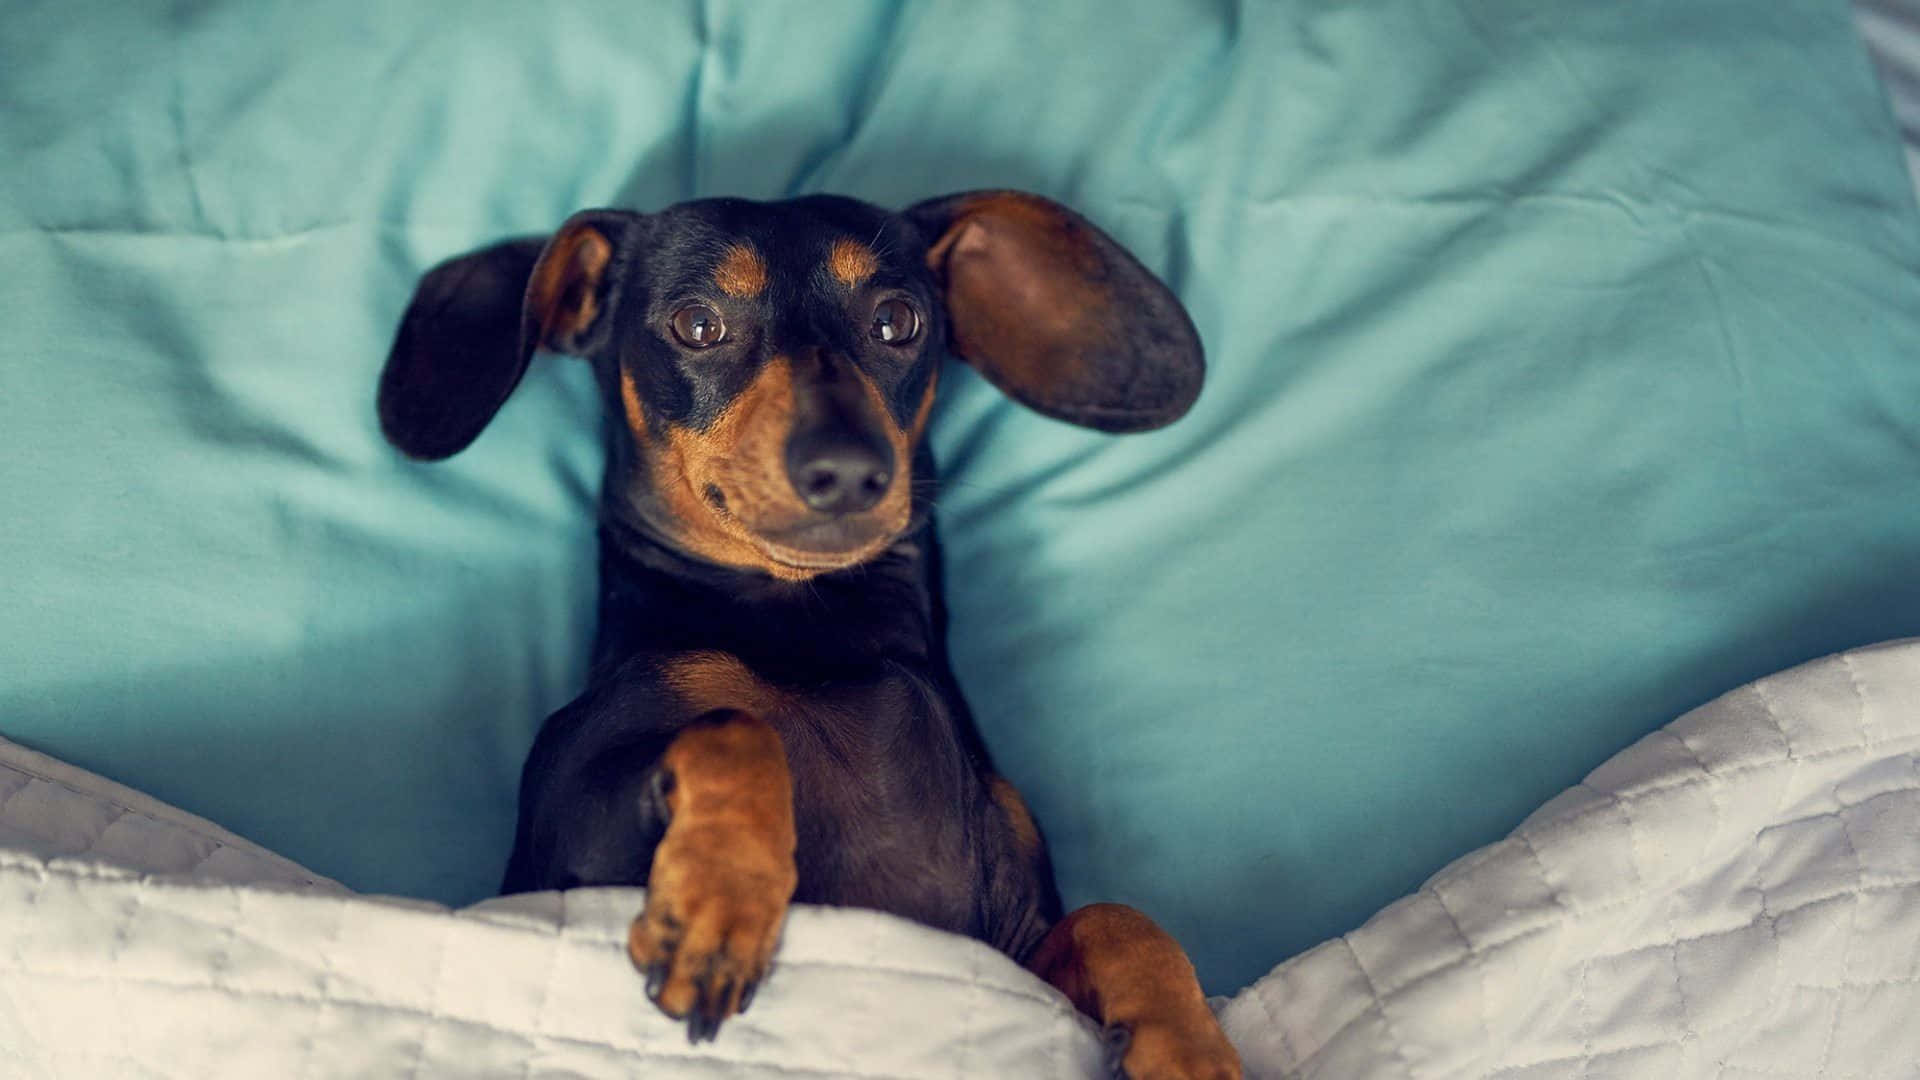 Download Adorable Dachshund Puppy | Wallpapers.com